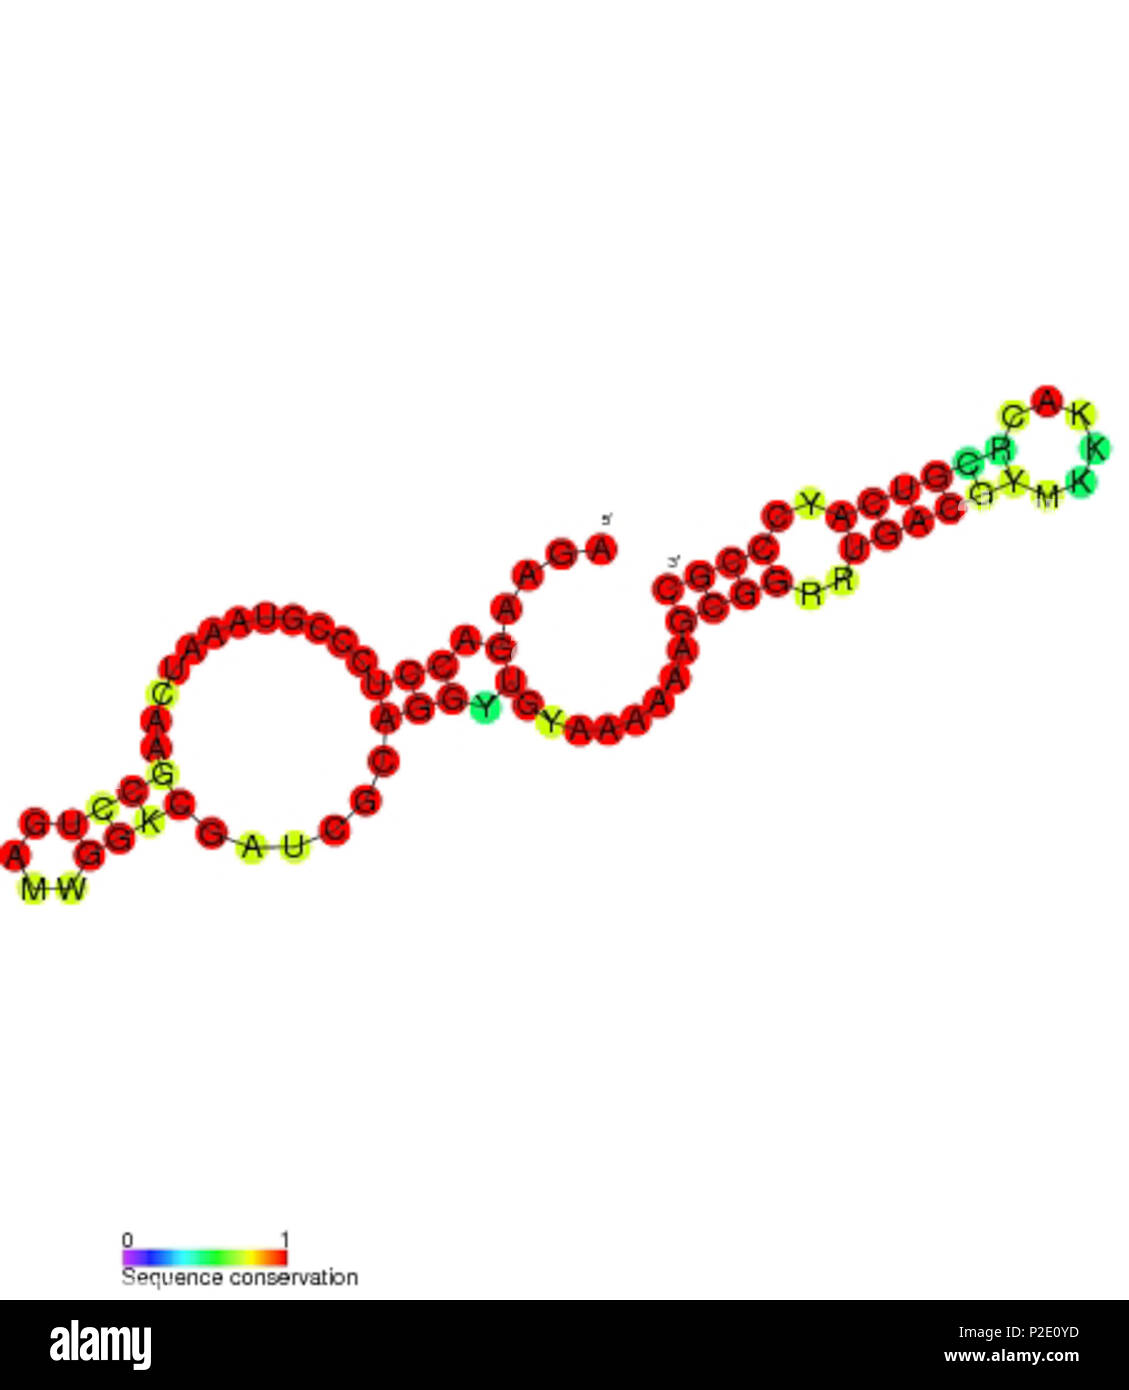 . Secondary structure and sequence conservation image for P31 non coding RNA (RF01676). Nucleotide colouring indicates sequence conservation between the members of this family. May 2011. Rfam database 39 P31 secondary structure Stock Photo